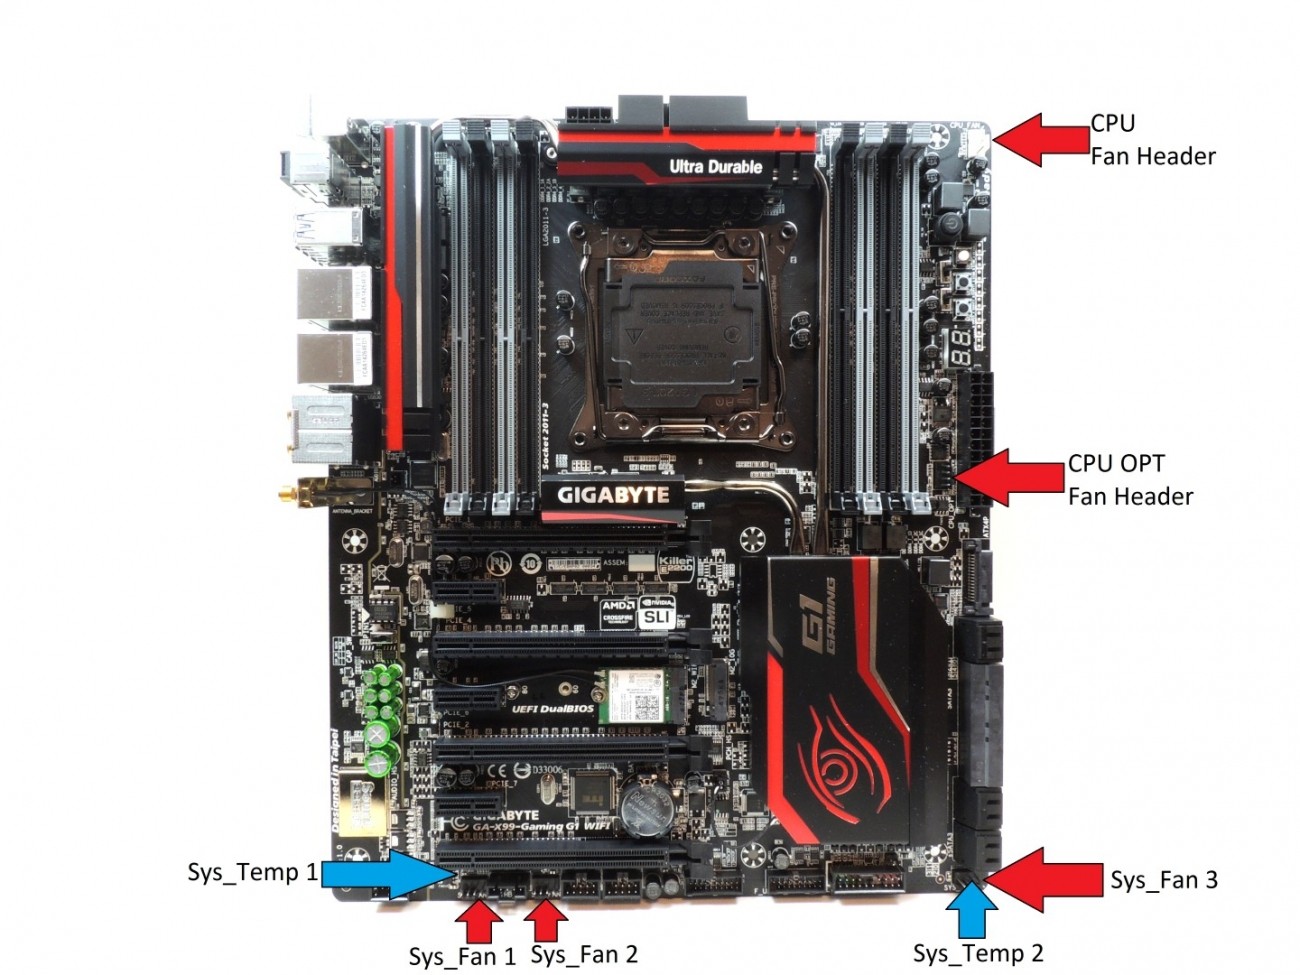 Gigabyte X99 Gaming G1 Motherboard Overview And Overclocking Guide Tweaktown